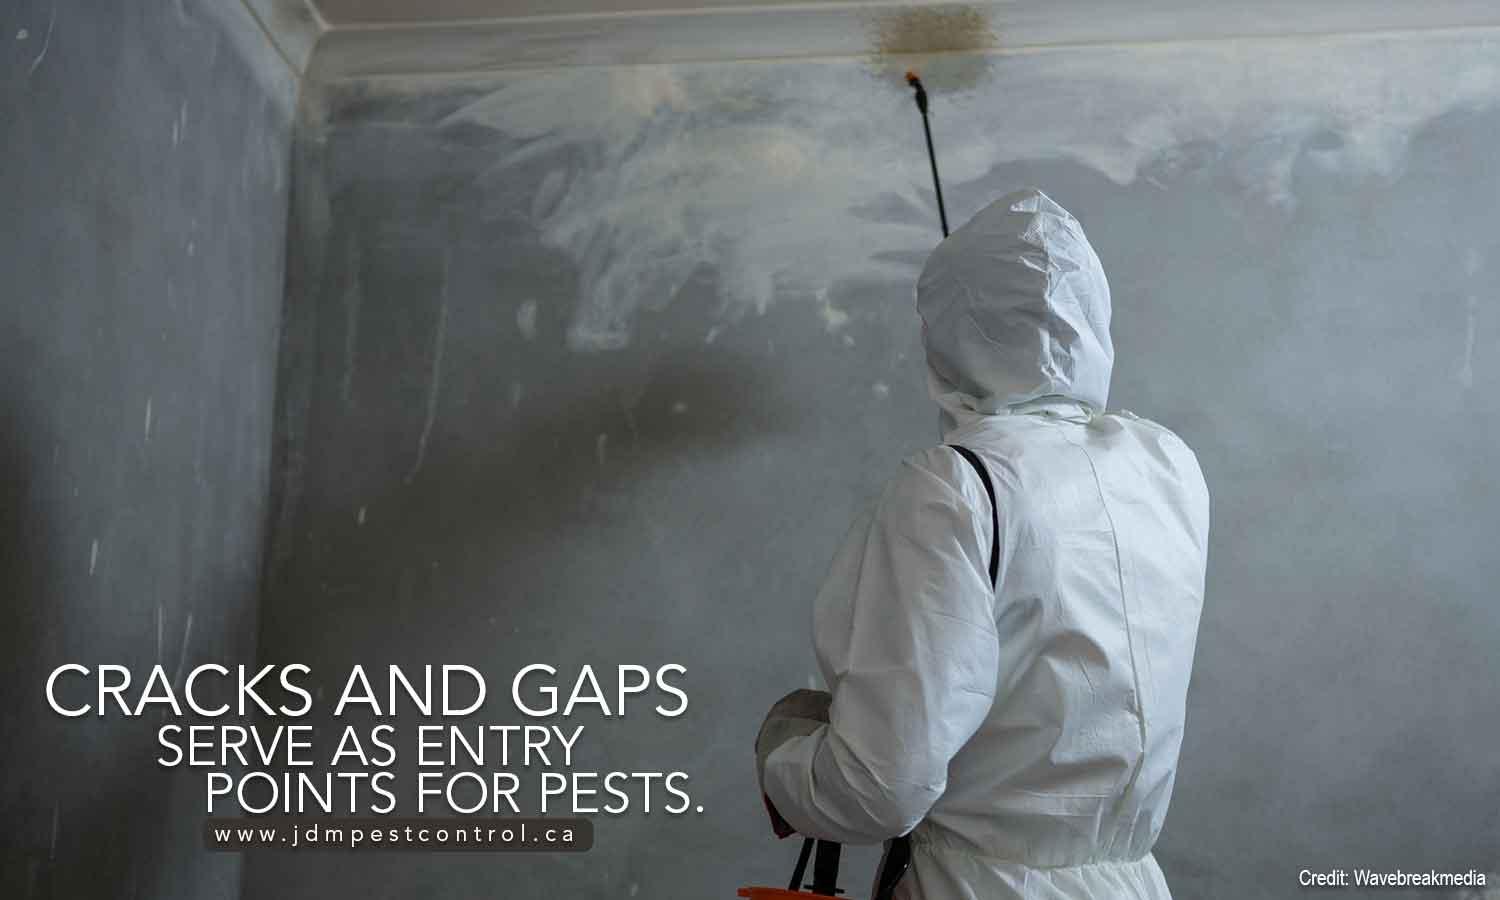 Cracks and gaps serve as entry points for pests.